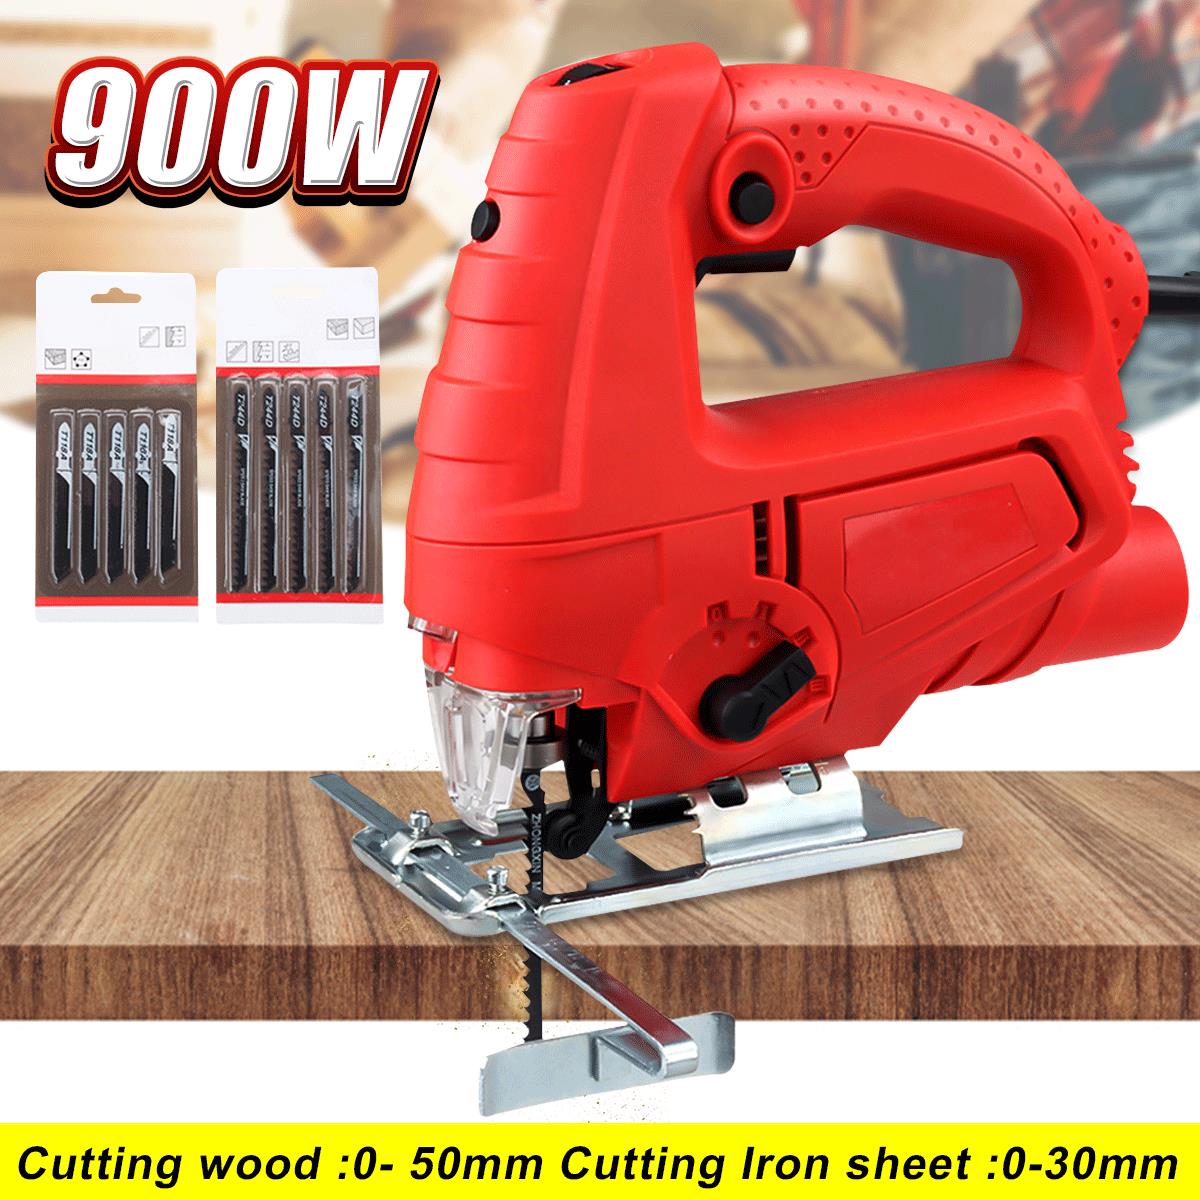 900W-220V-Electric-Saws-Electric-Scroll-Sweep-Saw-Kit-Wood-Work-Tools-With-Saw-Blades-1347457